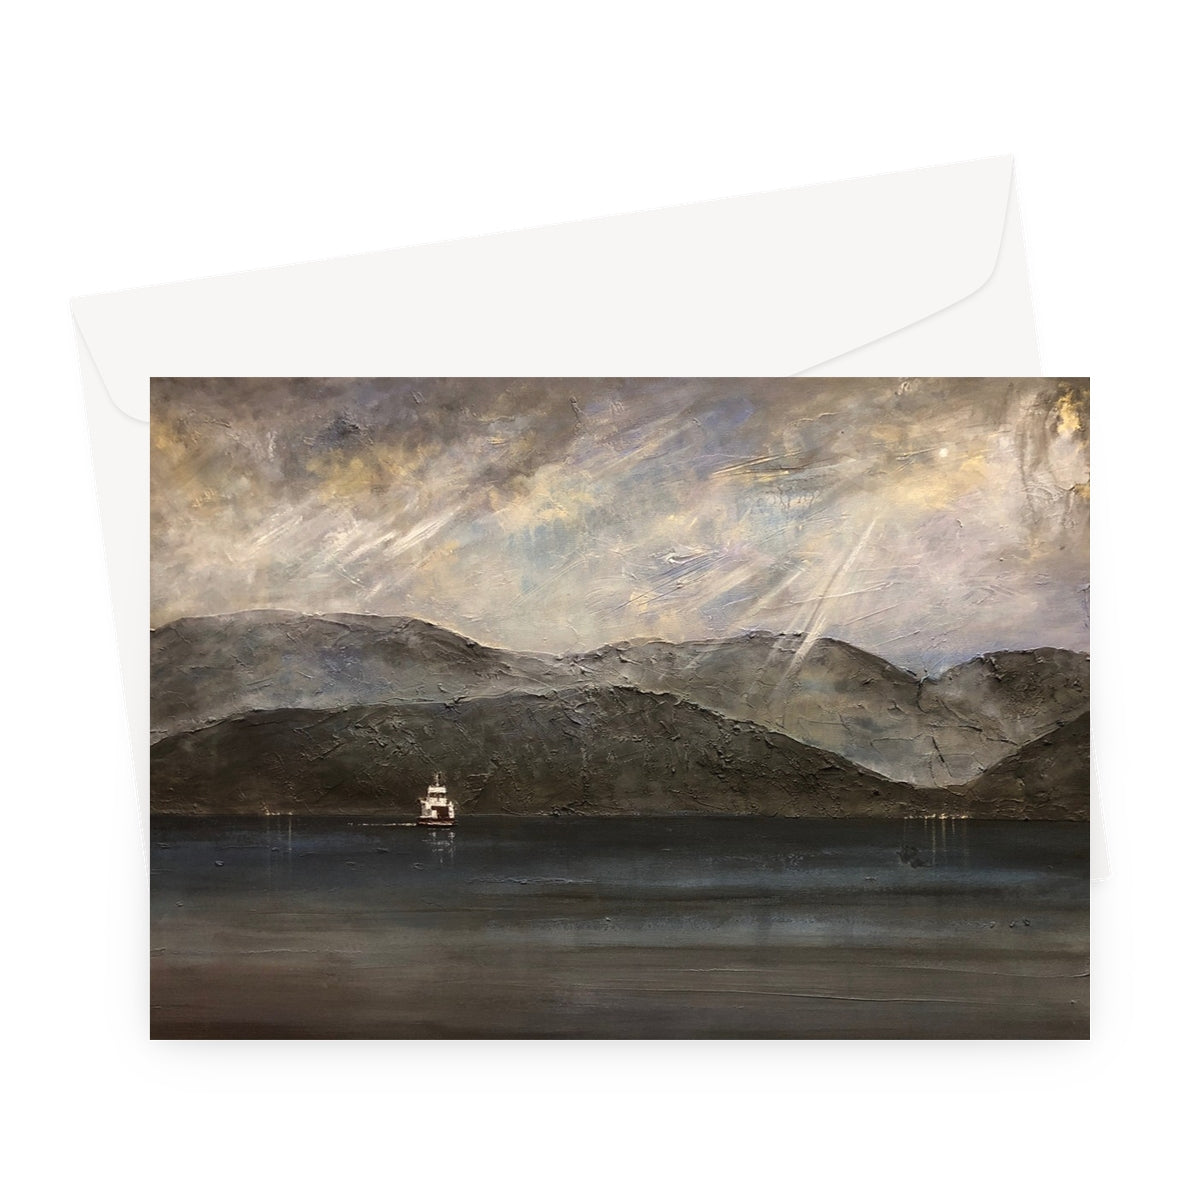 Lochranza Moonlit Ferry Arran Art Gifts Greeting Card-Greetings Cards-Arran Art Gallery-A5 Landscape-10 Cards-Paintings, Prints, Homeware, Art Gifts From Scotland By Scottish Artist Kevin Hunter